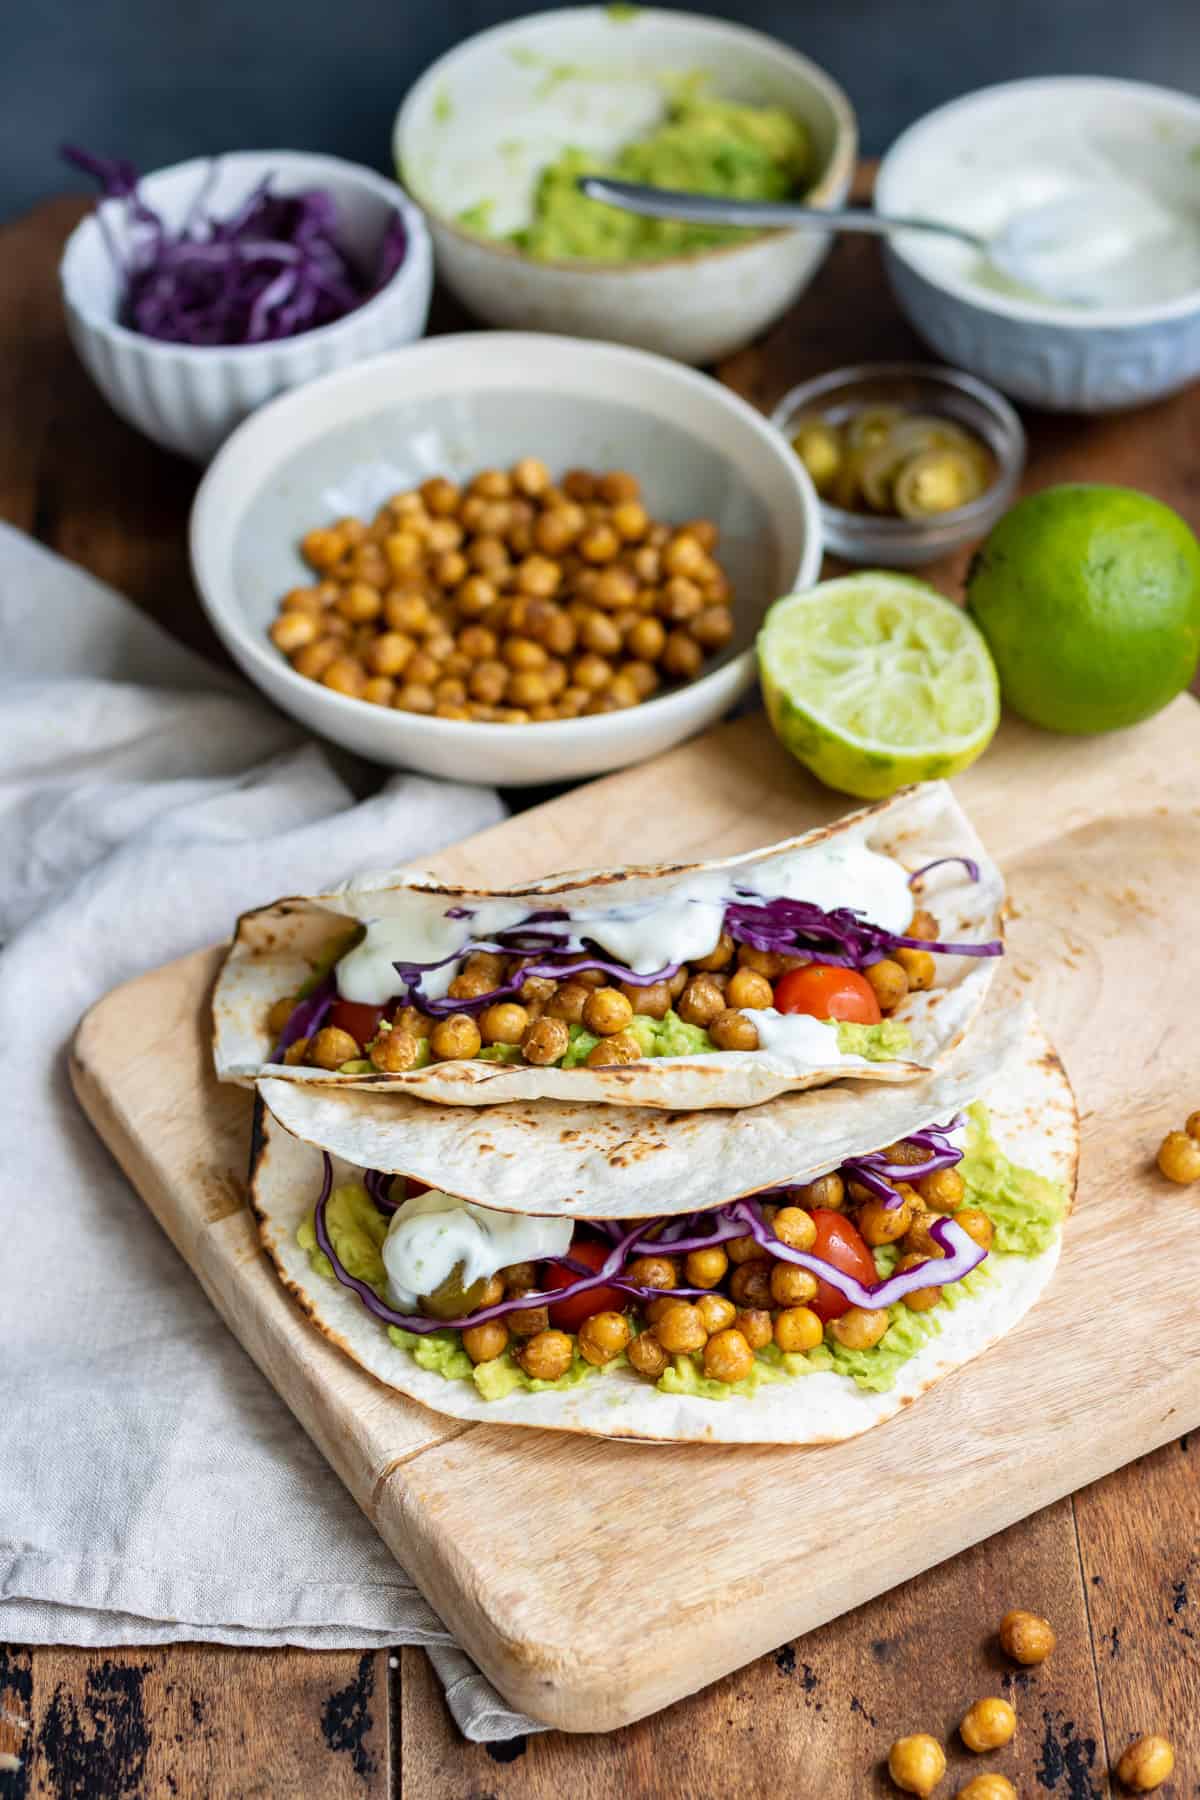 Chickpea tacos on a wooden board in front of ingredients.